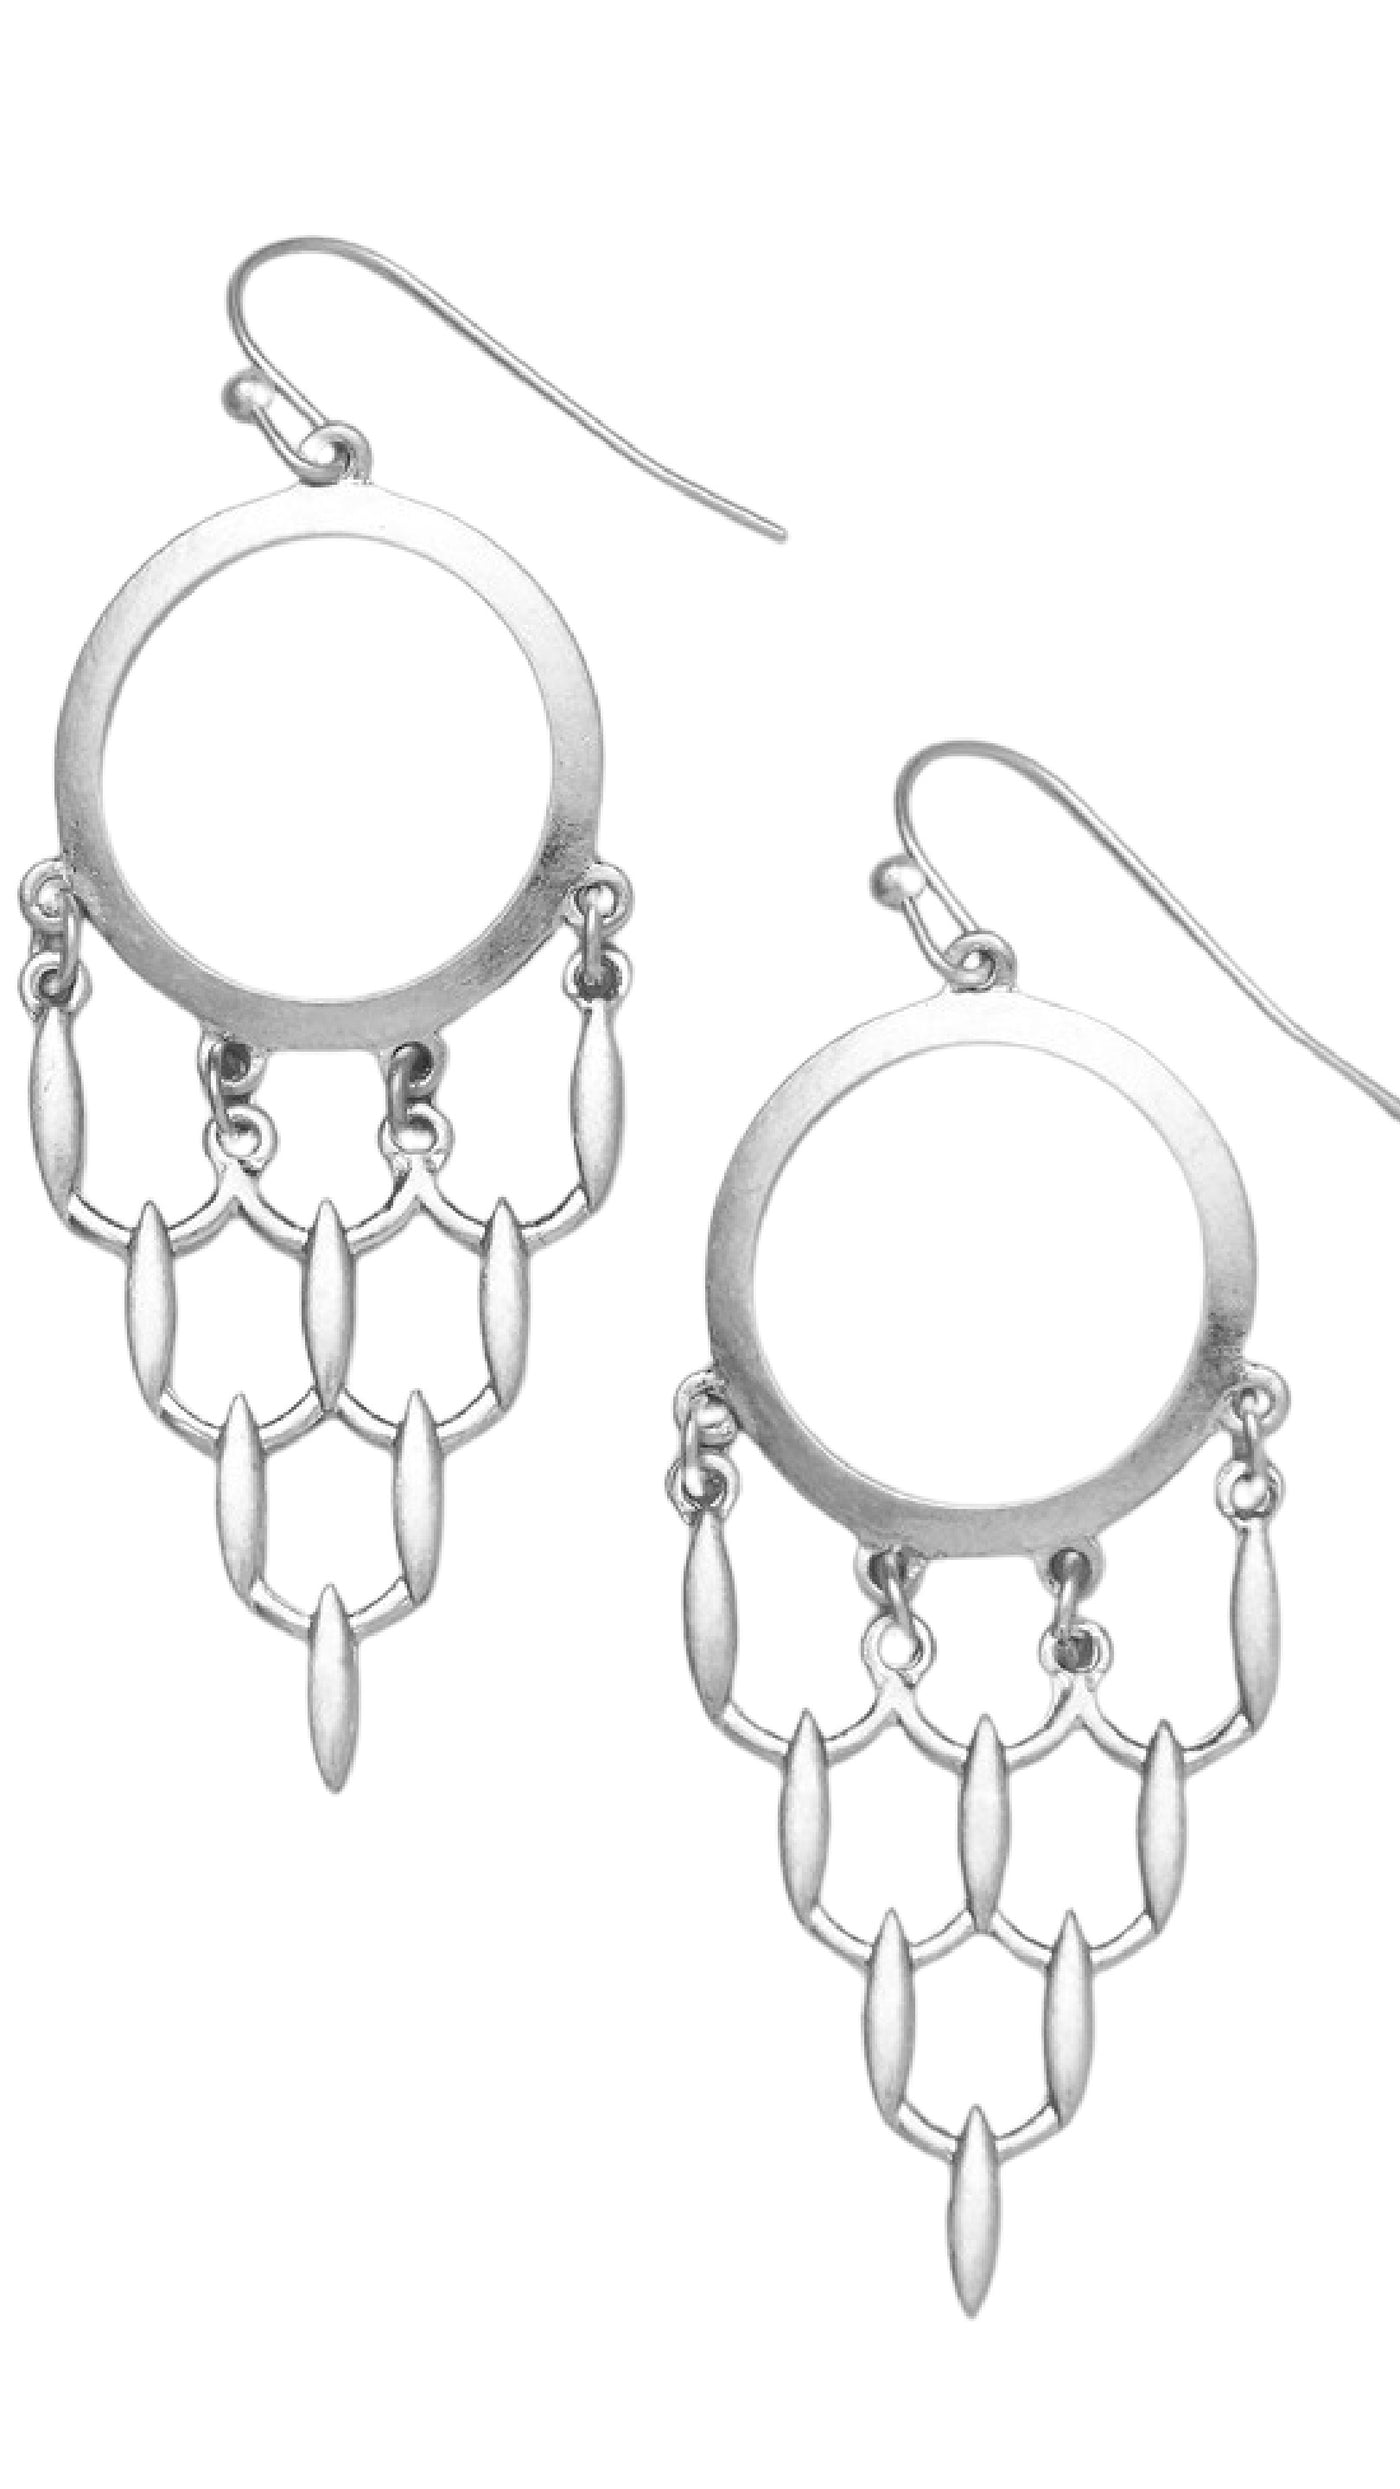 Dream Catcher Earrings - Silver - Piper and Hollow Boutique